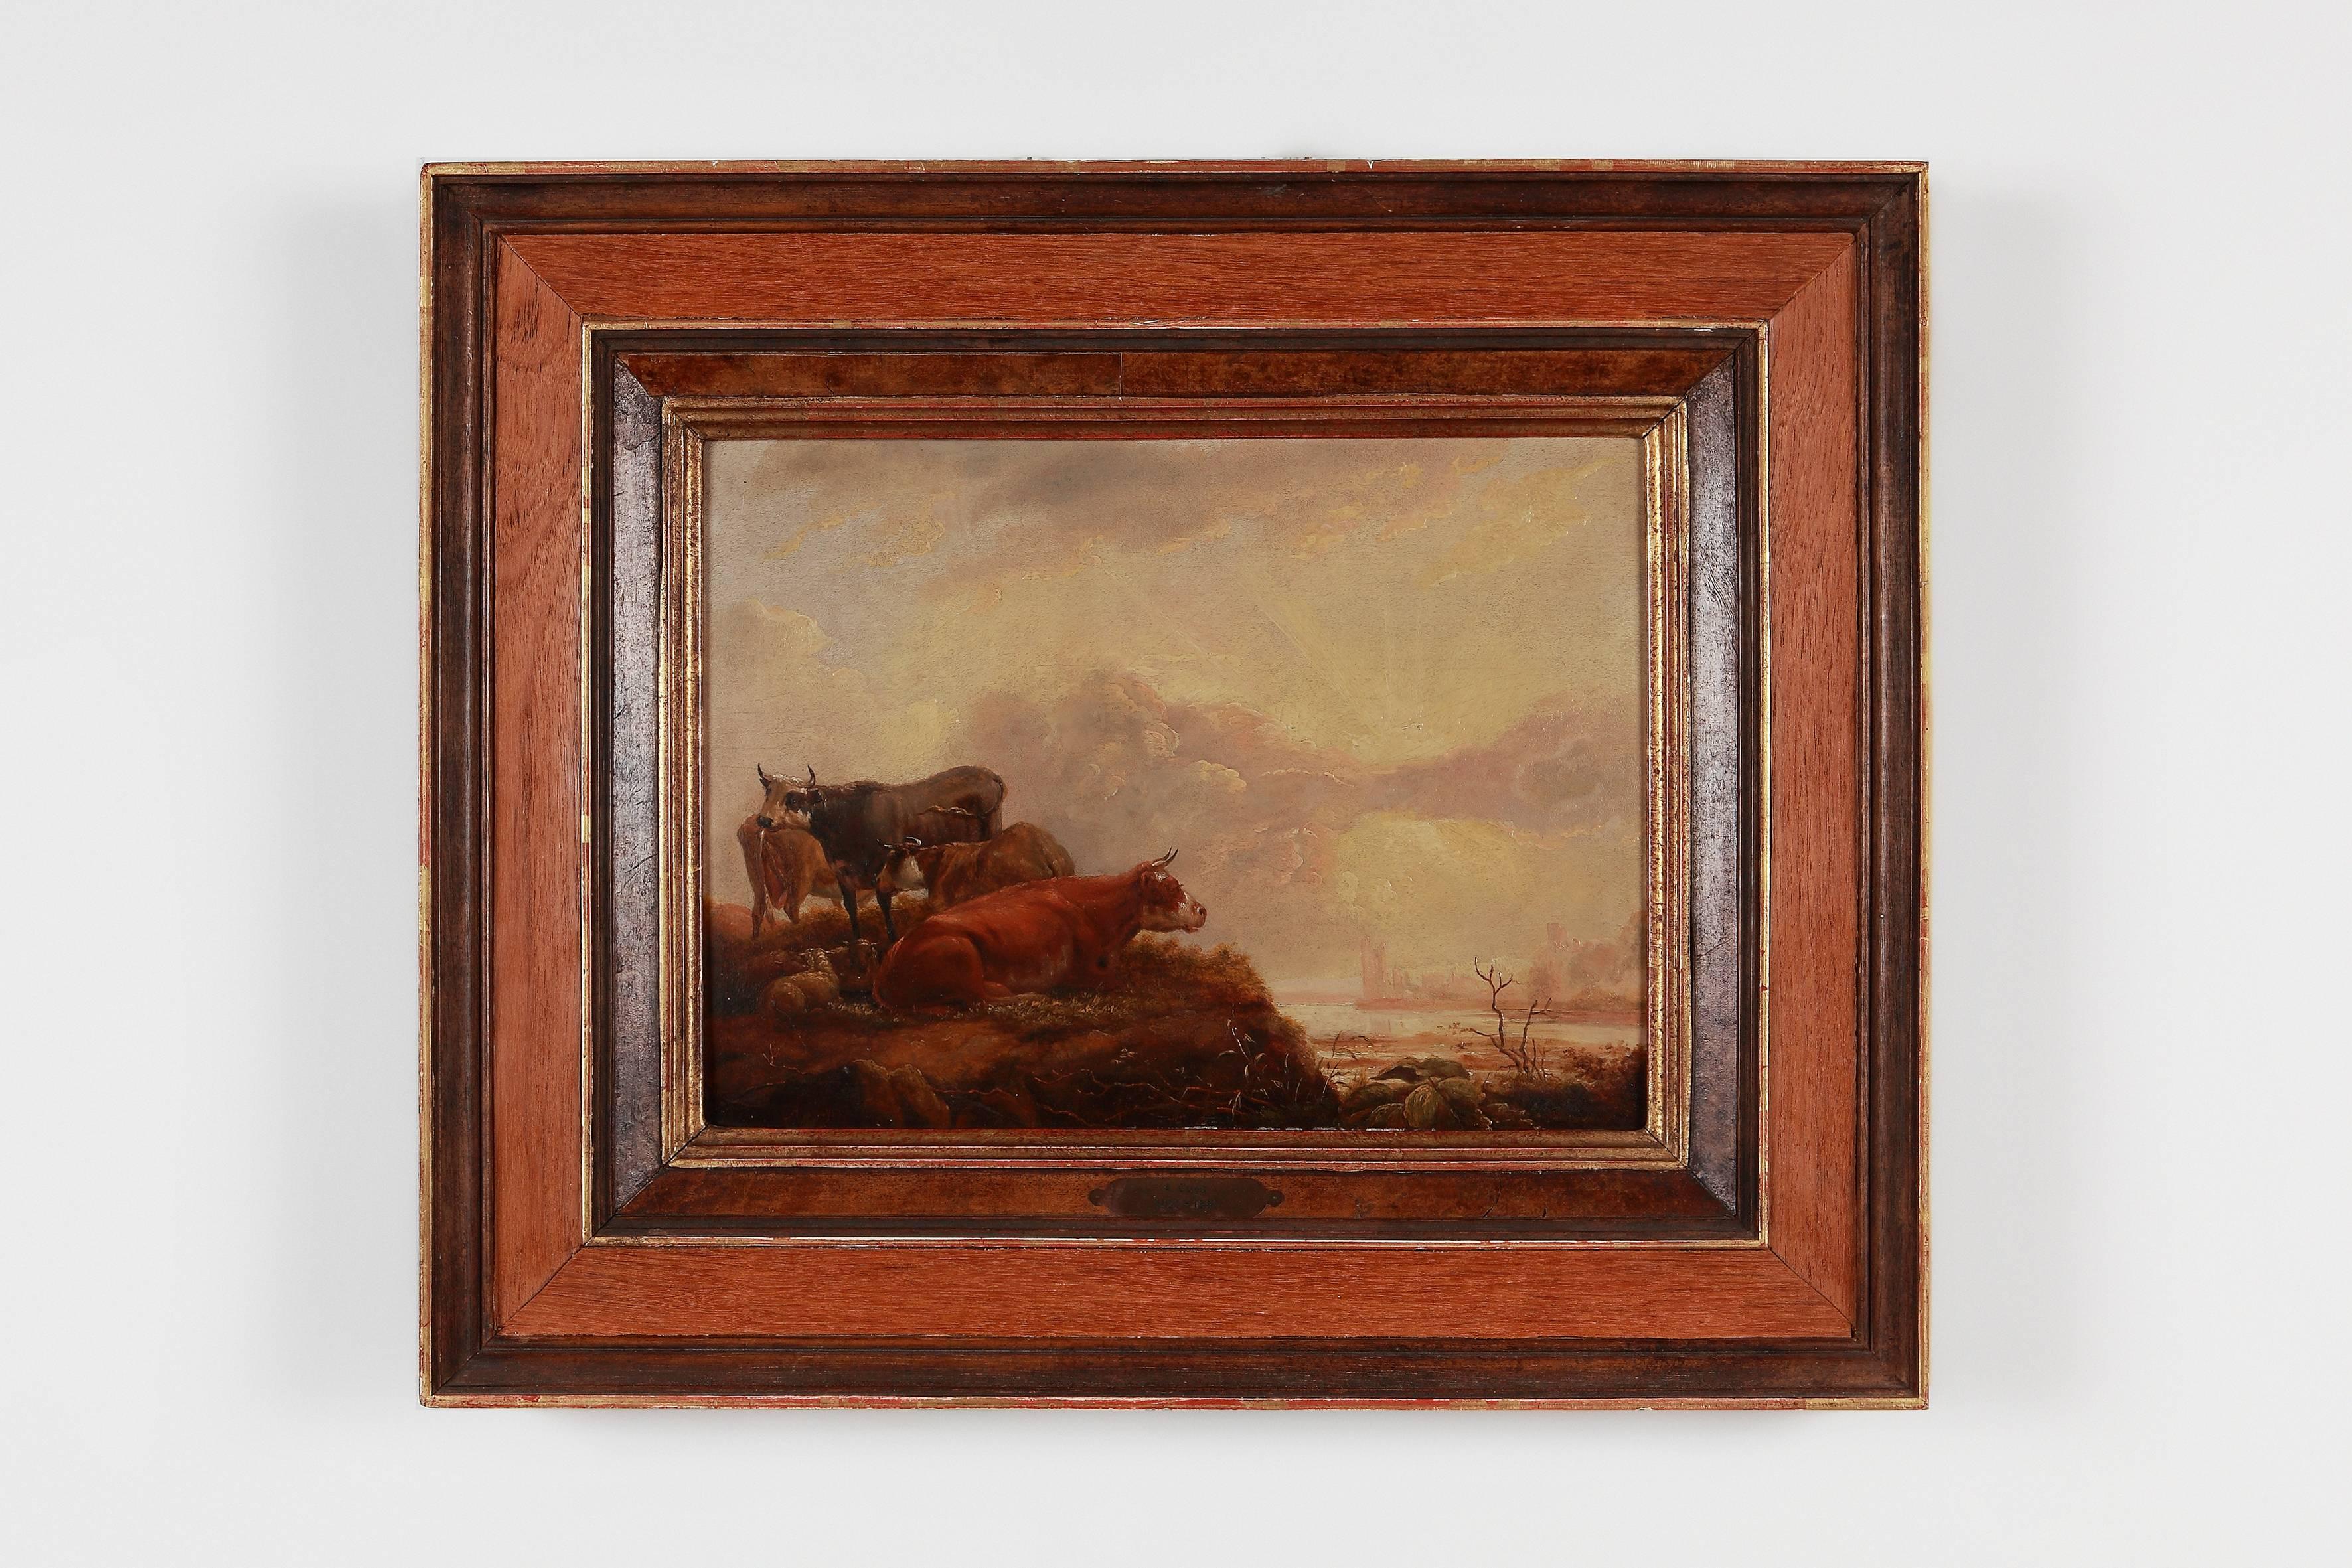 Oil paint on wood by Aelbert Cuyp ( 1620-1691 ), Dutch. Signed lower left: A. Cuyp. Gerahmt.
Measurements: 9.72 x 13.58 in ( 24,7 x 34,5 cm ), framed: 17.28 x 21.06 in ( 43,9 x 53,5 cm )

Aelbert Jacobsz Cuyp was one of the leading Dutch landscape